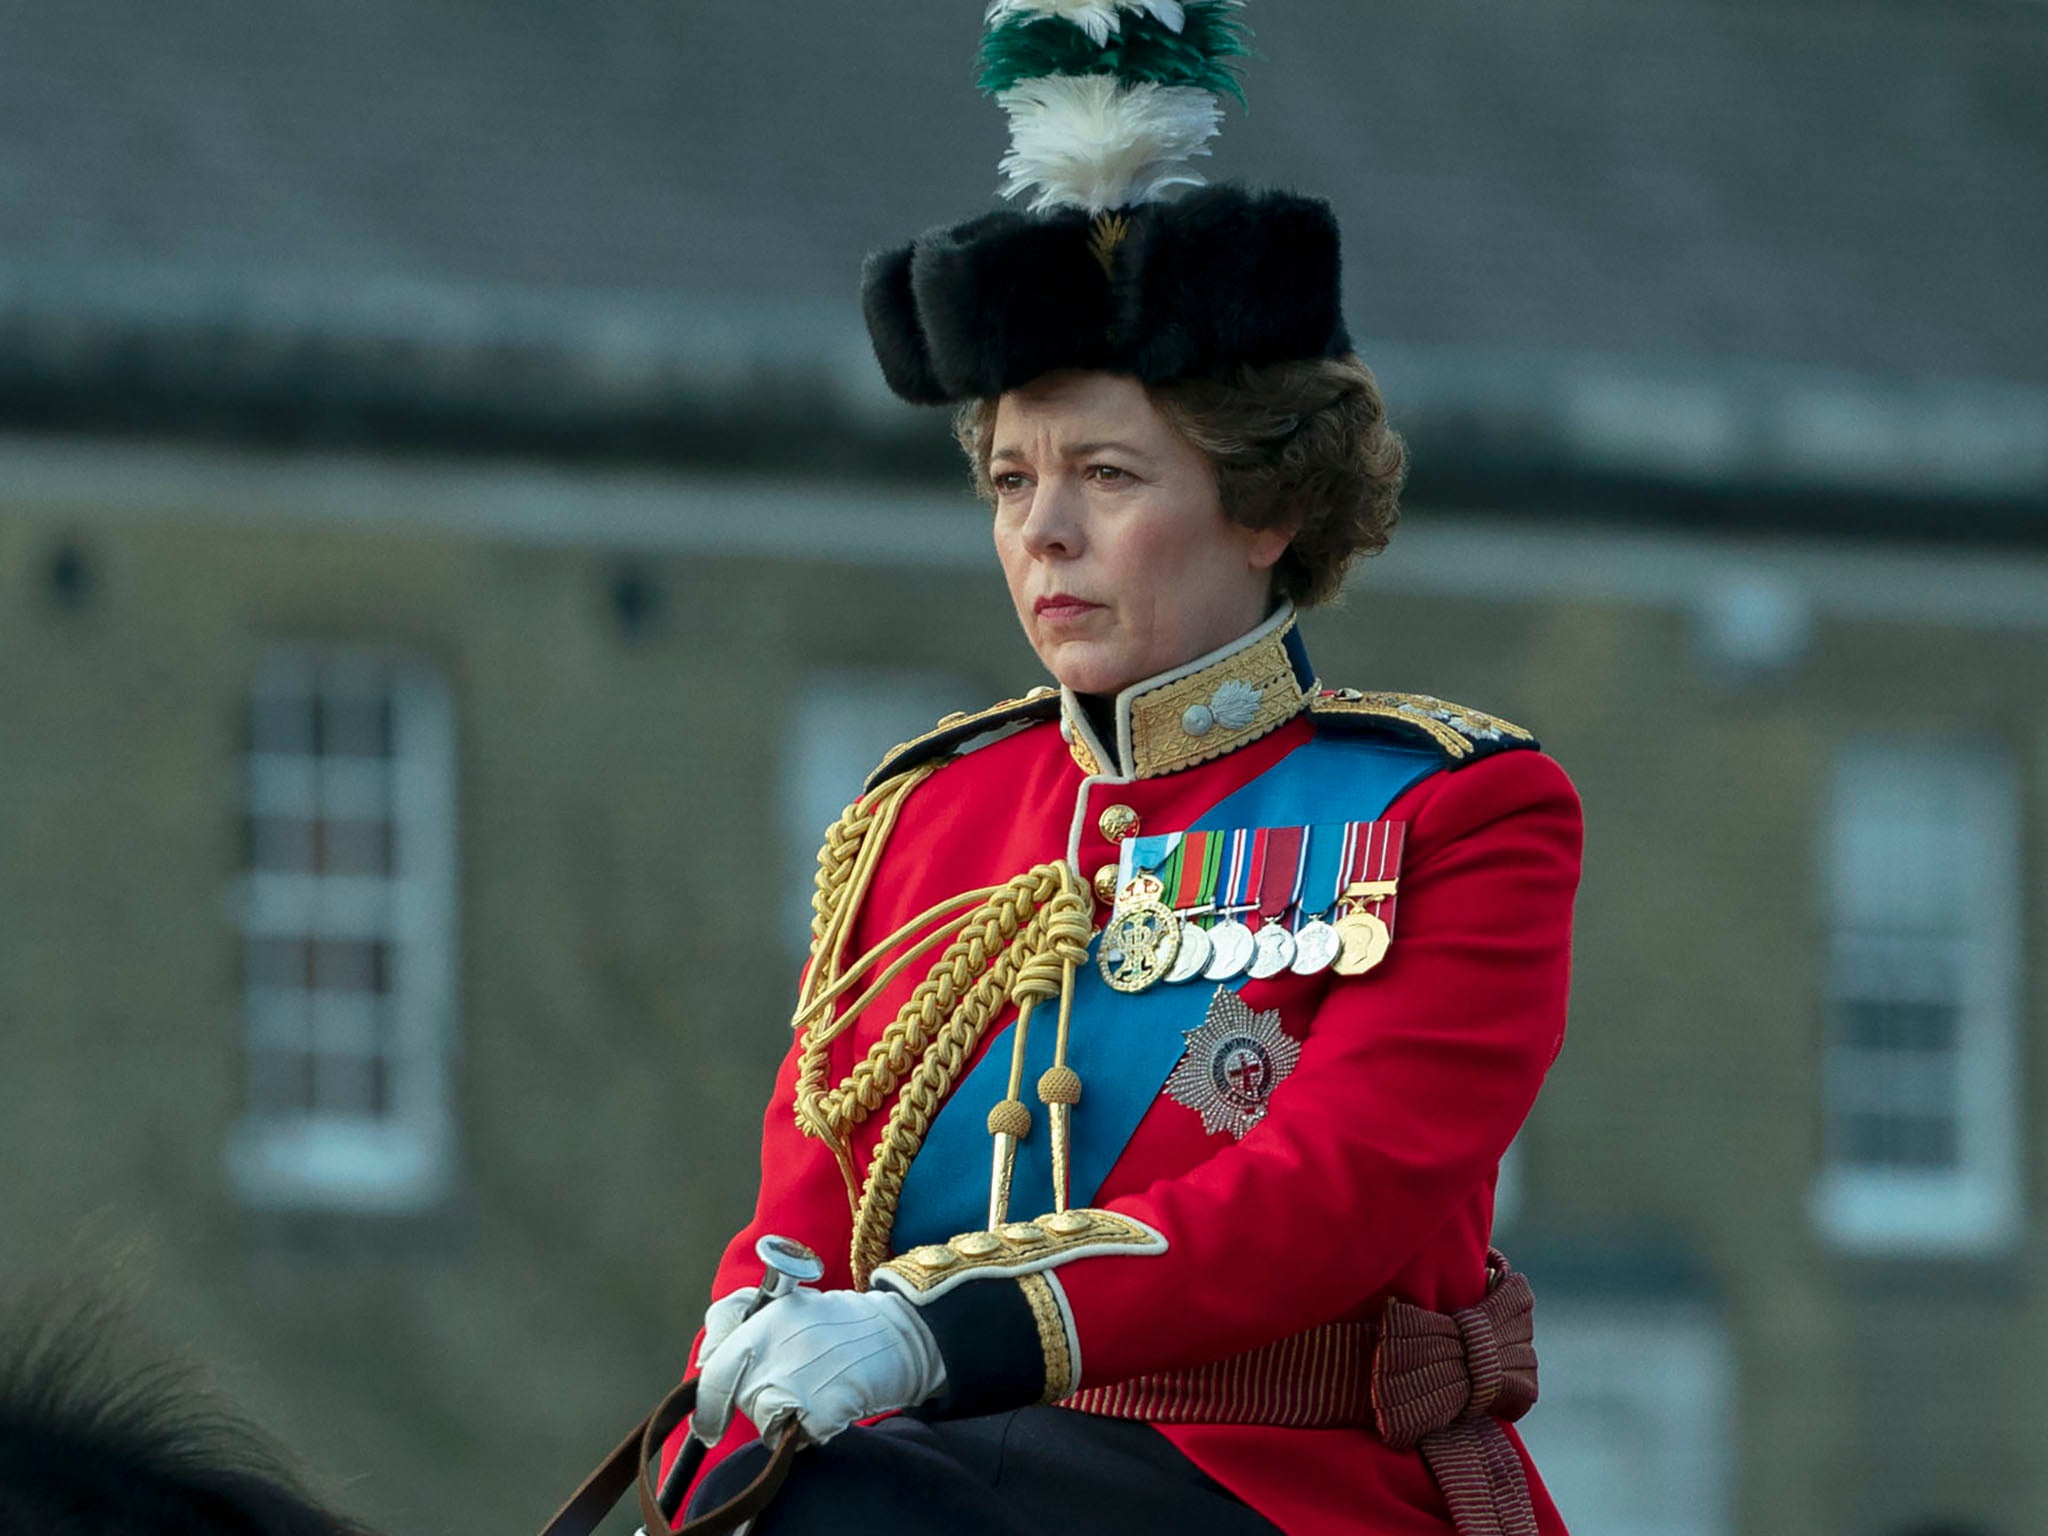 Olivia Colman as Queen Elizabeth II, though she won’t be around for season five and beyond